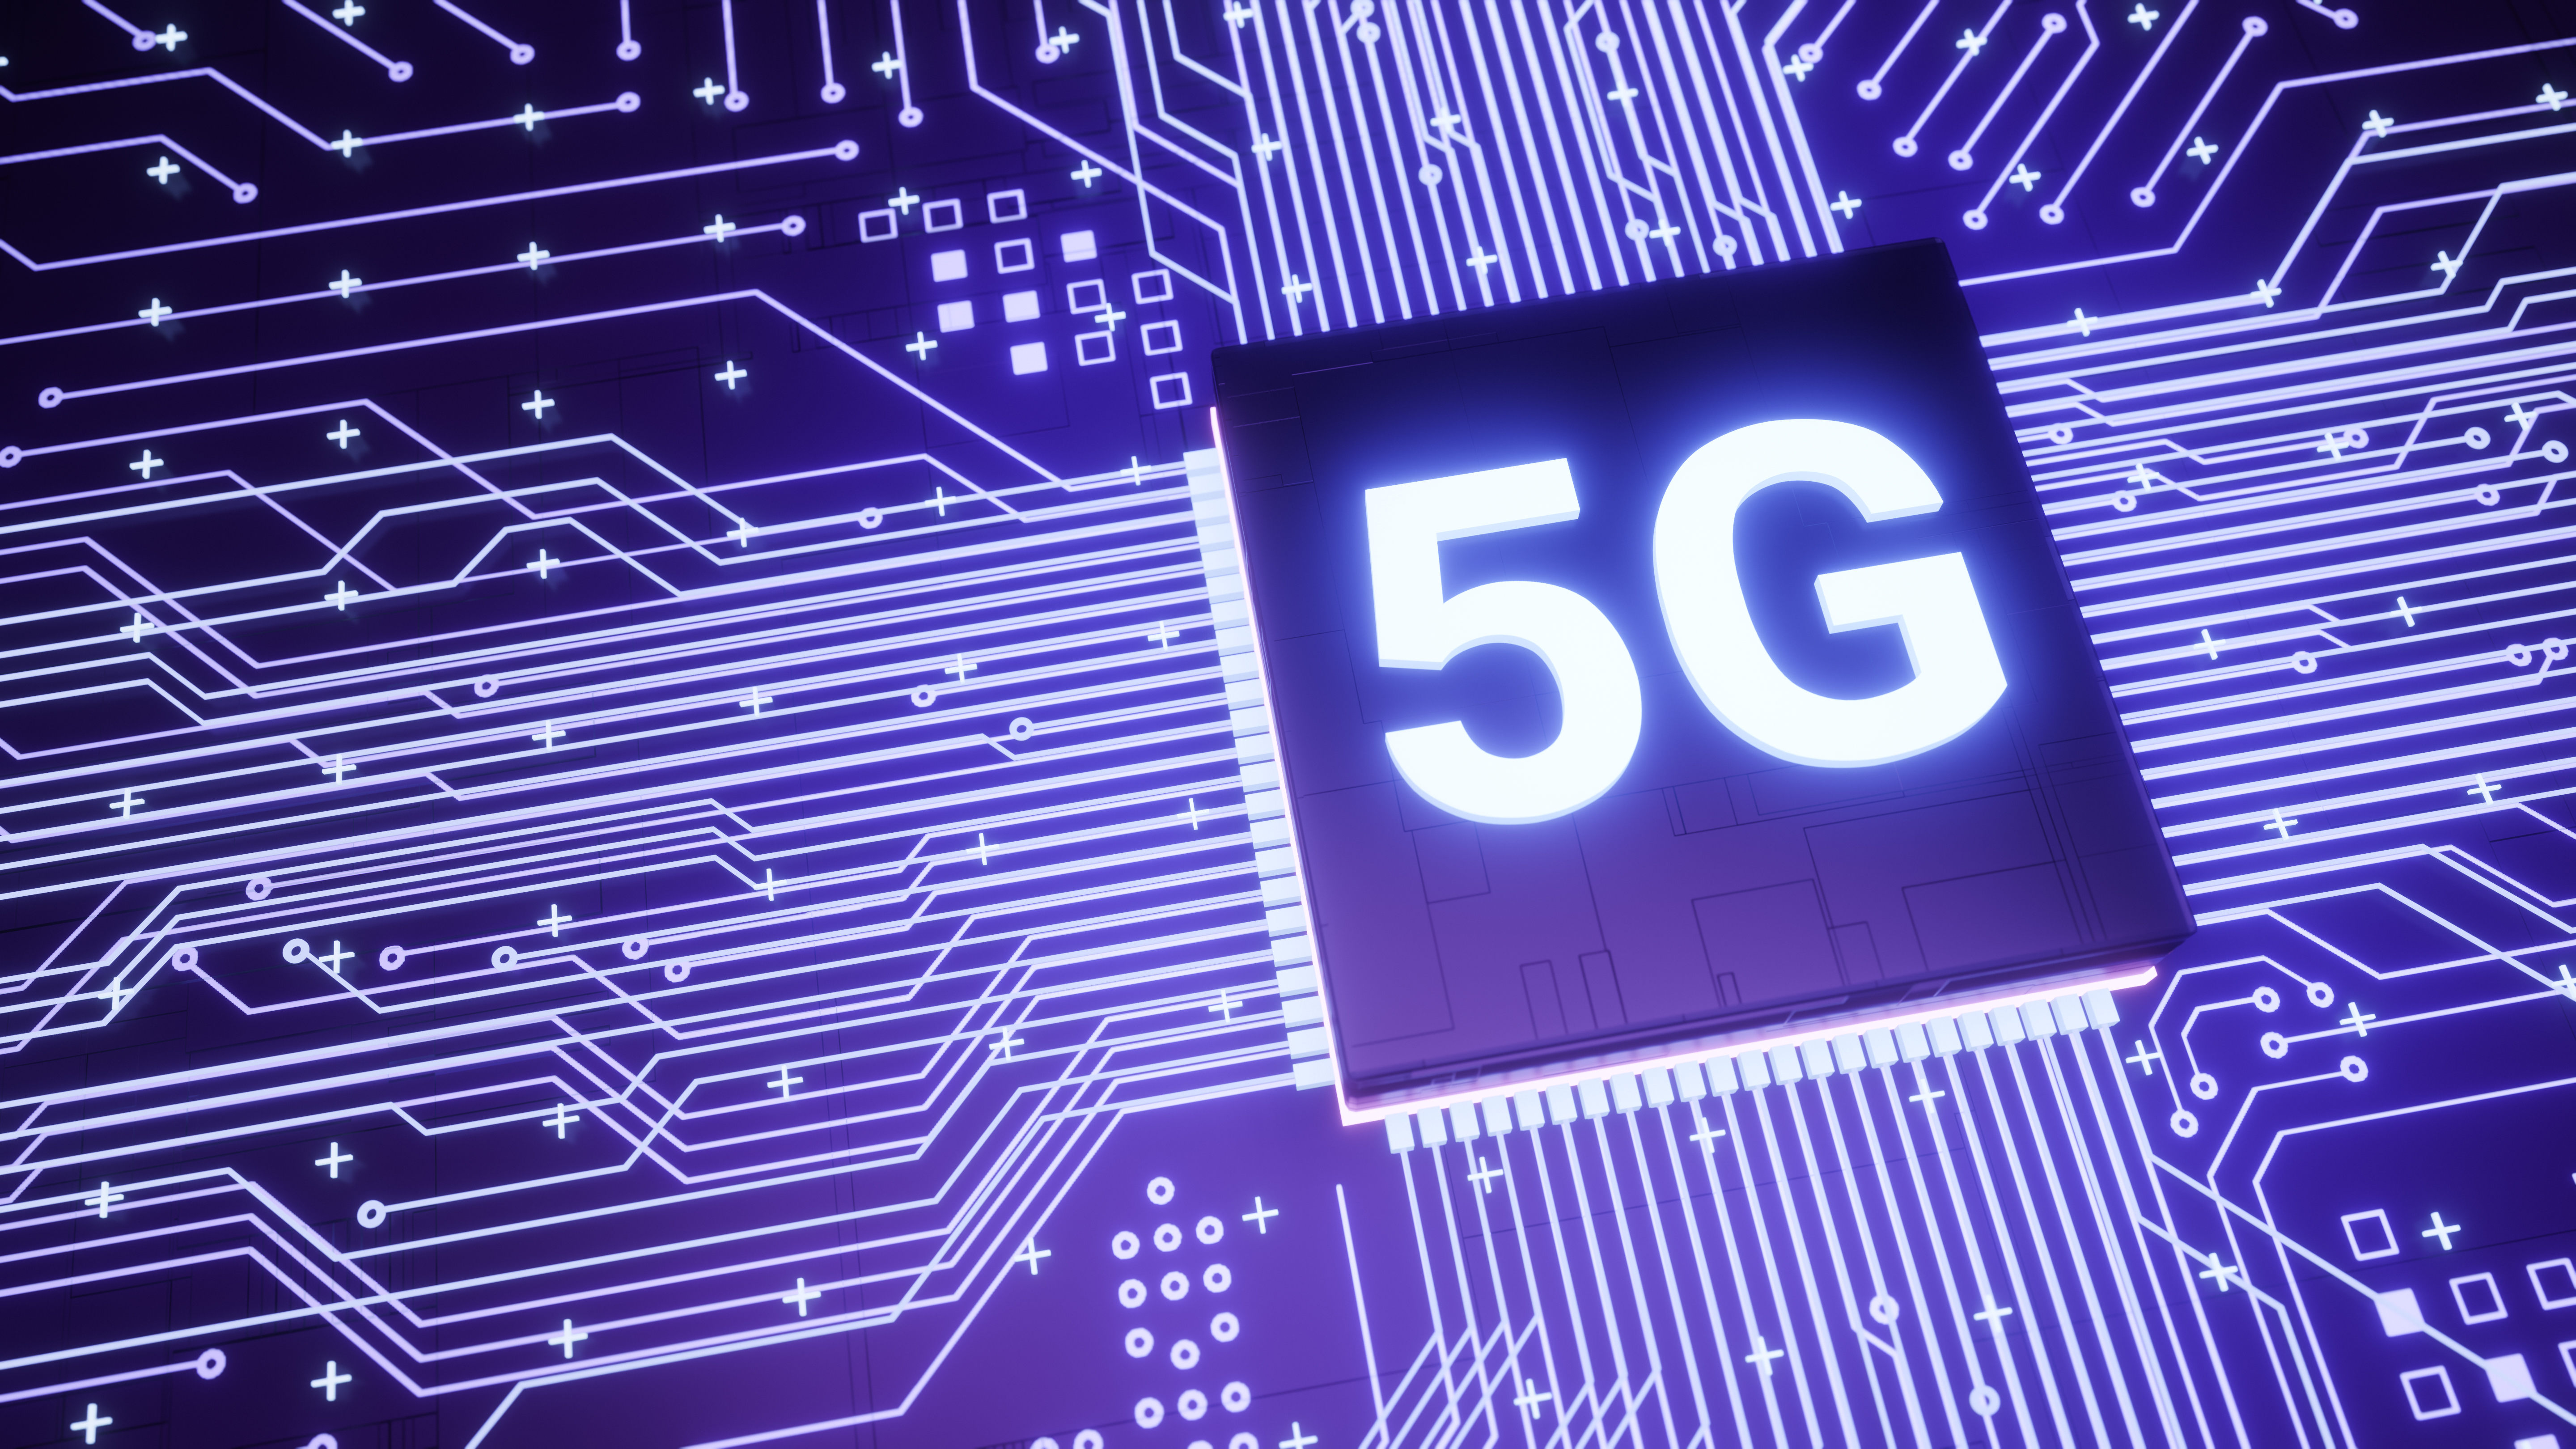 5g support microchip on smartphone circuit board smart iot communication microprocessor 3d rendering futuristic fast real time mobile network internet technology concept background